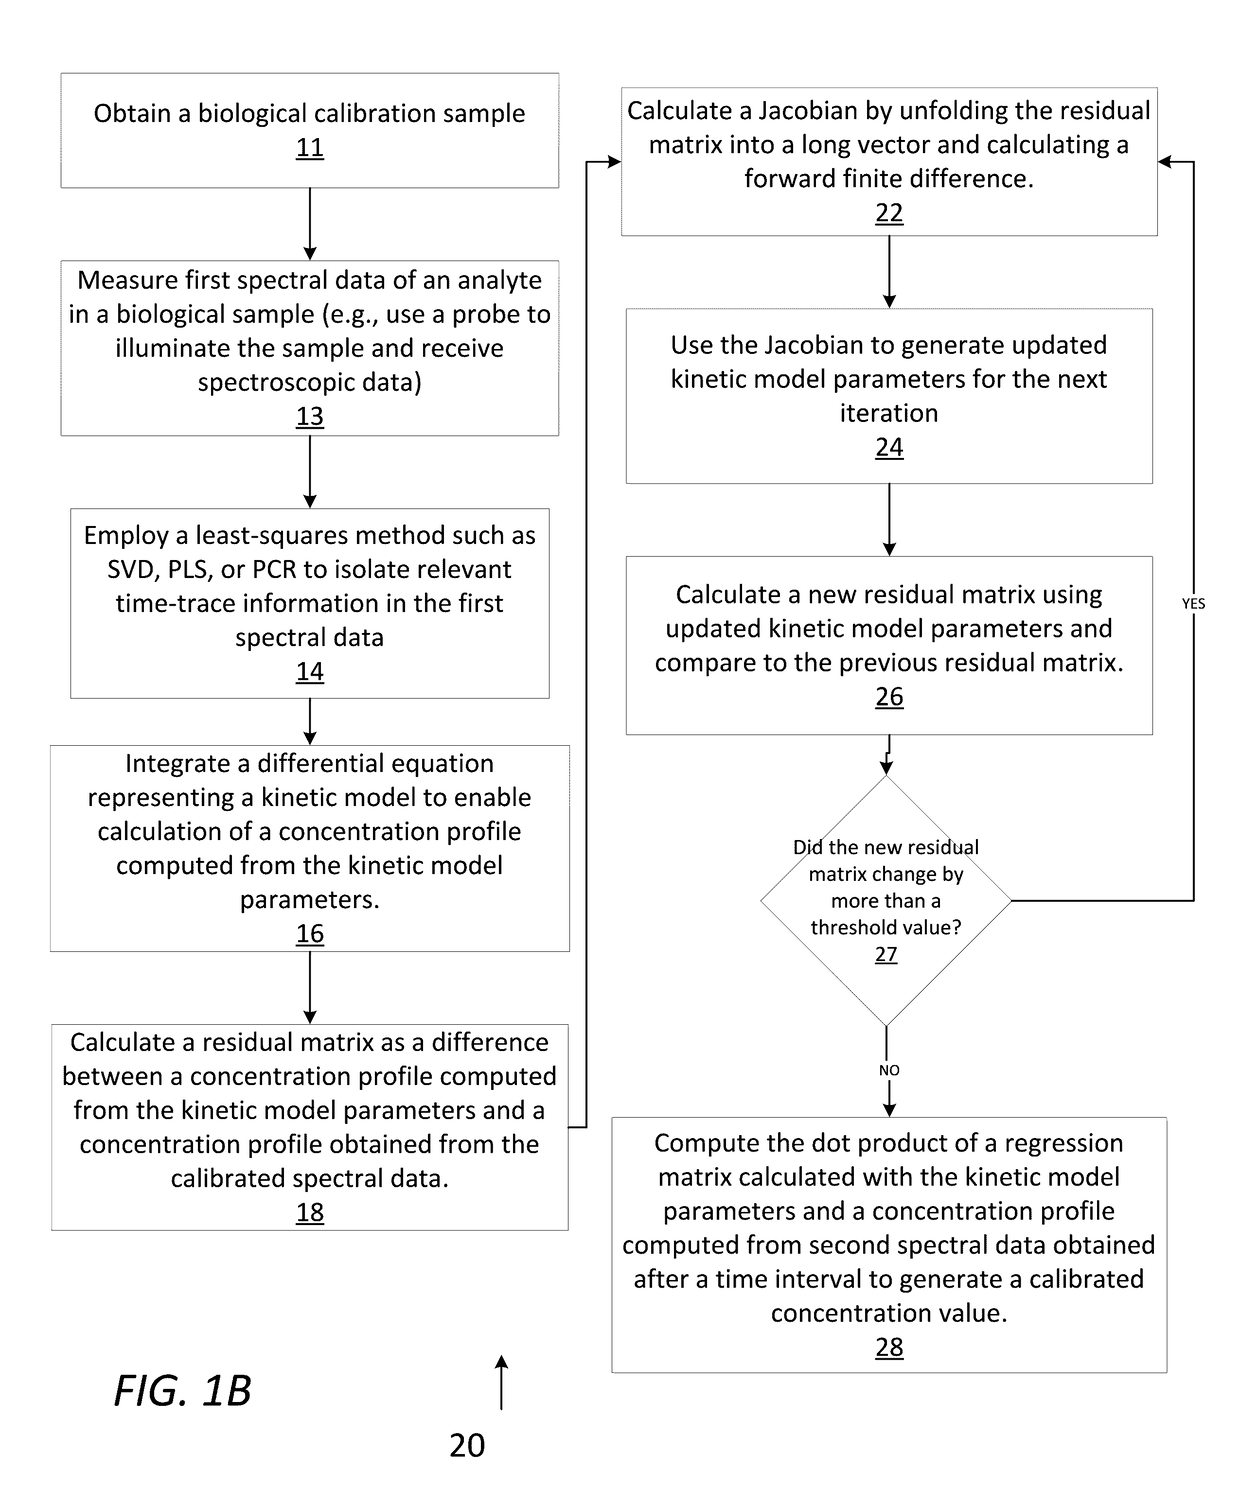 Systems and methods for sampling calibration of non-invasive analyte measurements